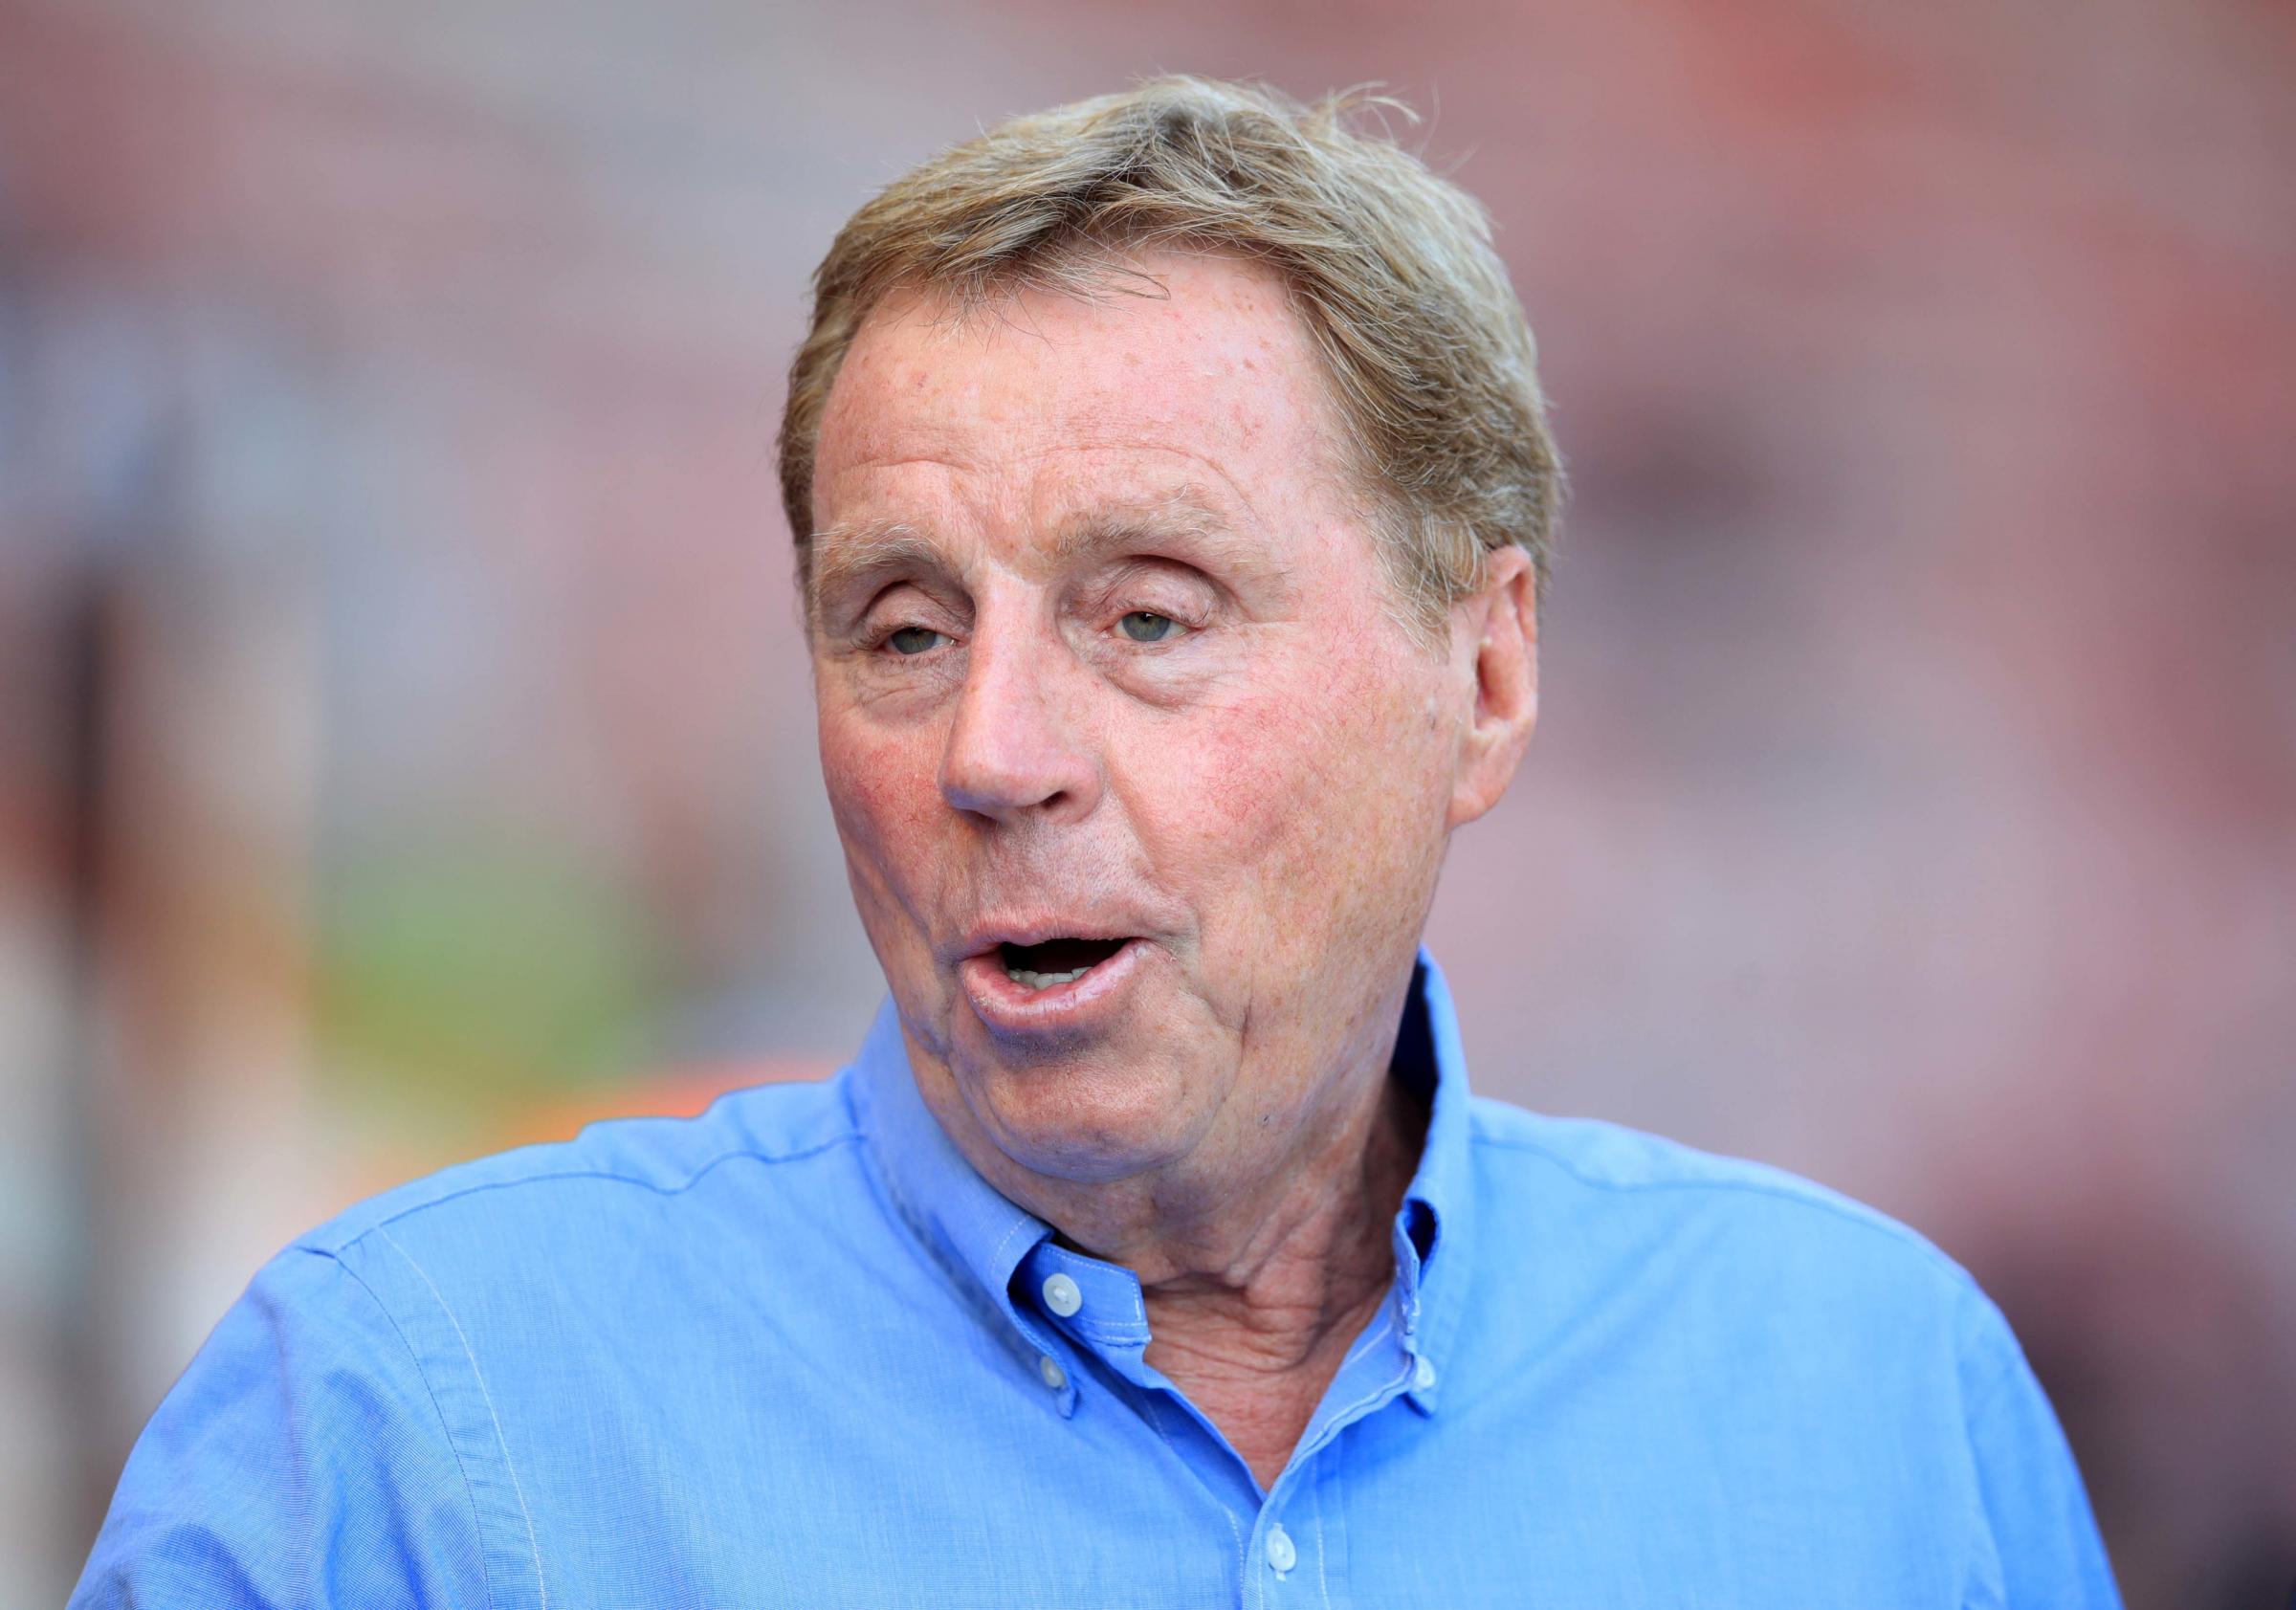 Harry Redknapp believes it 'would be unfair' to decide Premier League relegation on points per game methods